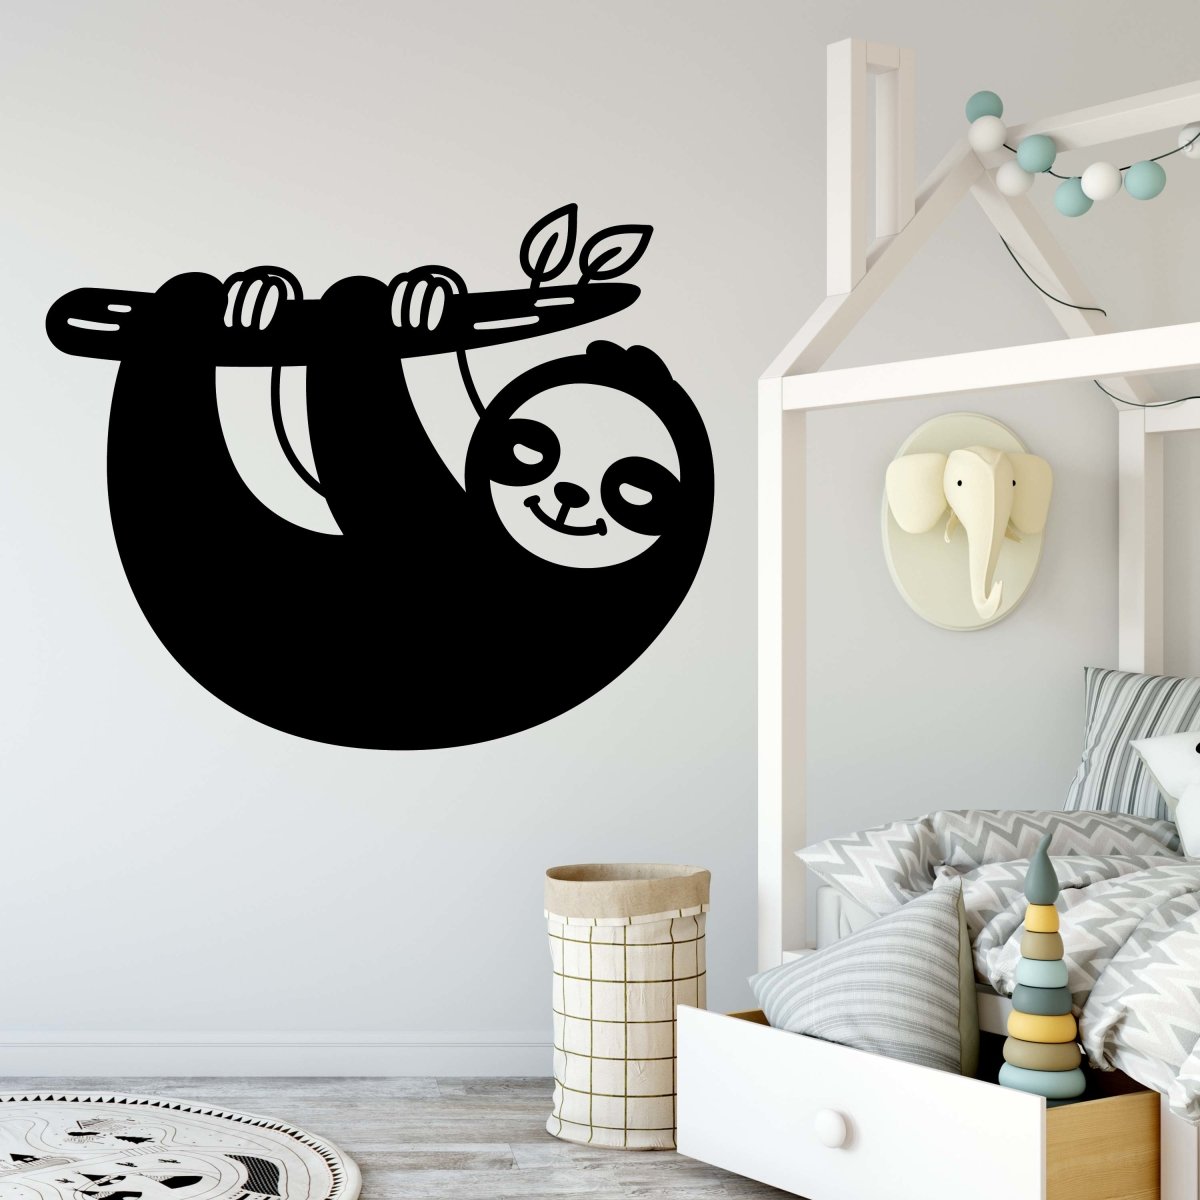 Discover the wall decal WT00000070 on a sloth branch